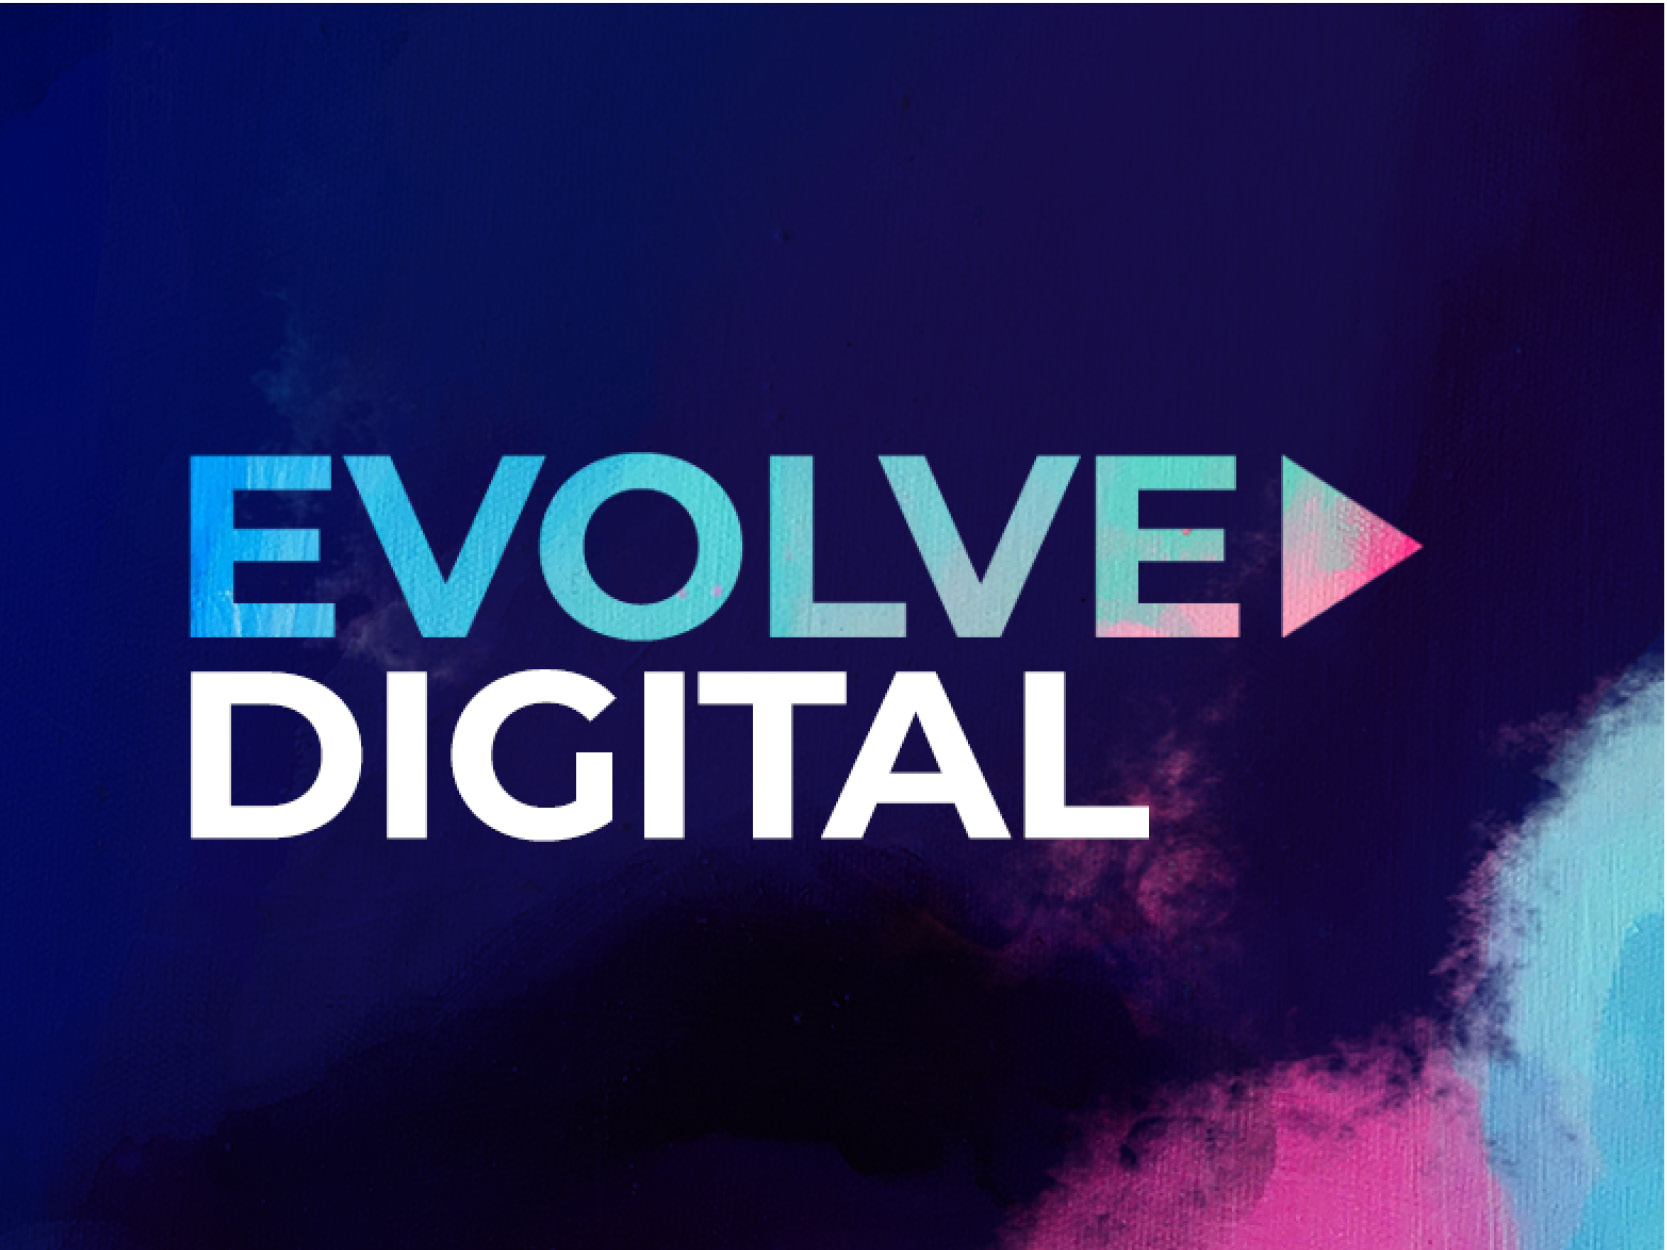 an arrow pointing to the right with the words evolve digital above it